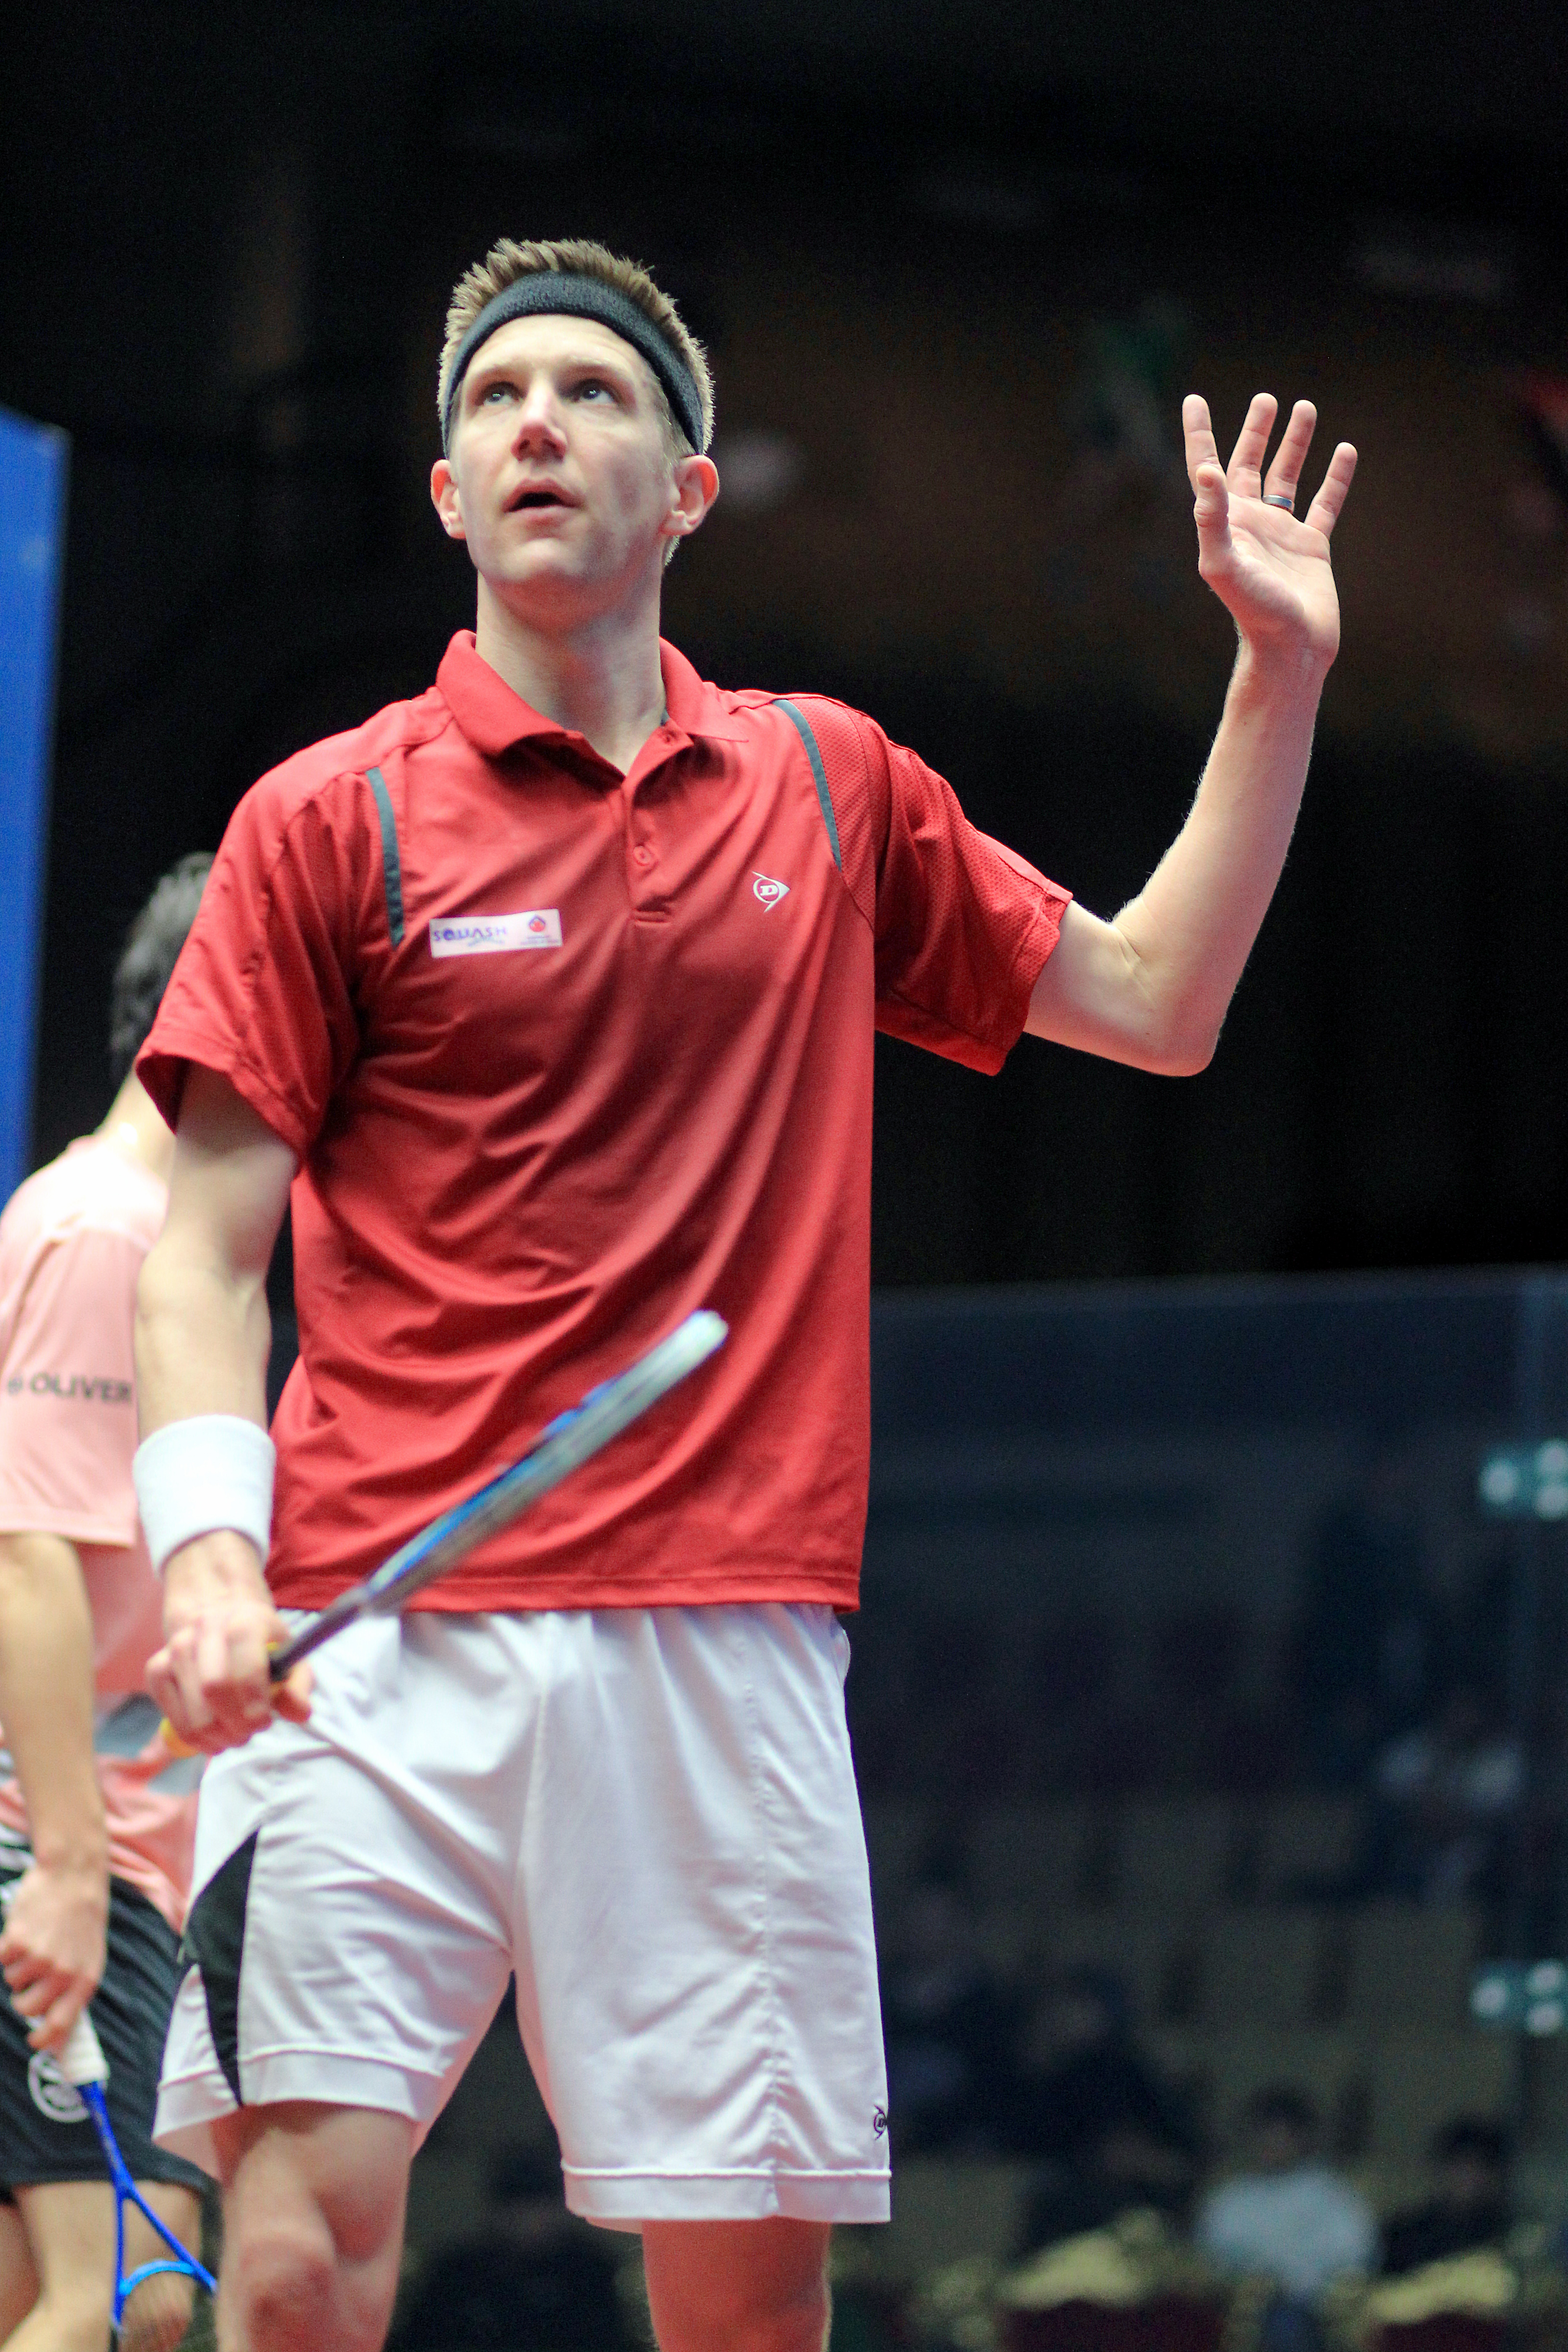 The Kuwait Cup would be the final PSA event in the career of Australia’s Stewart Boswell, who retired after falling to Gregory Gaultier in the quarterfinals.